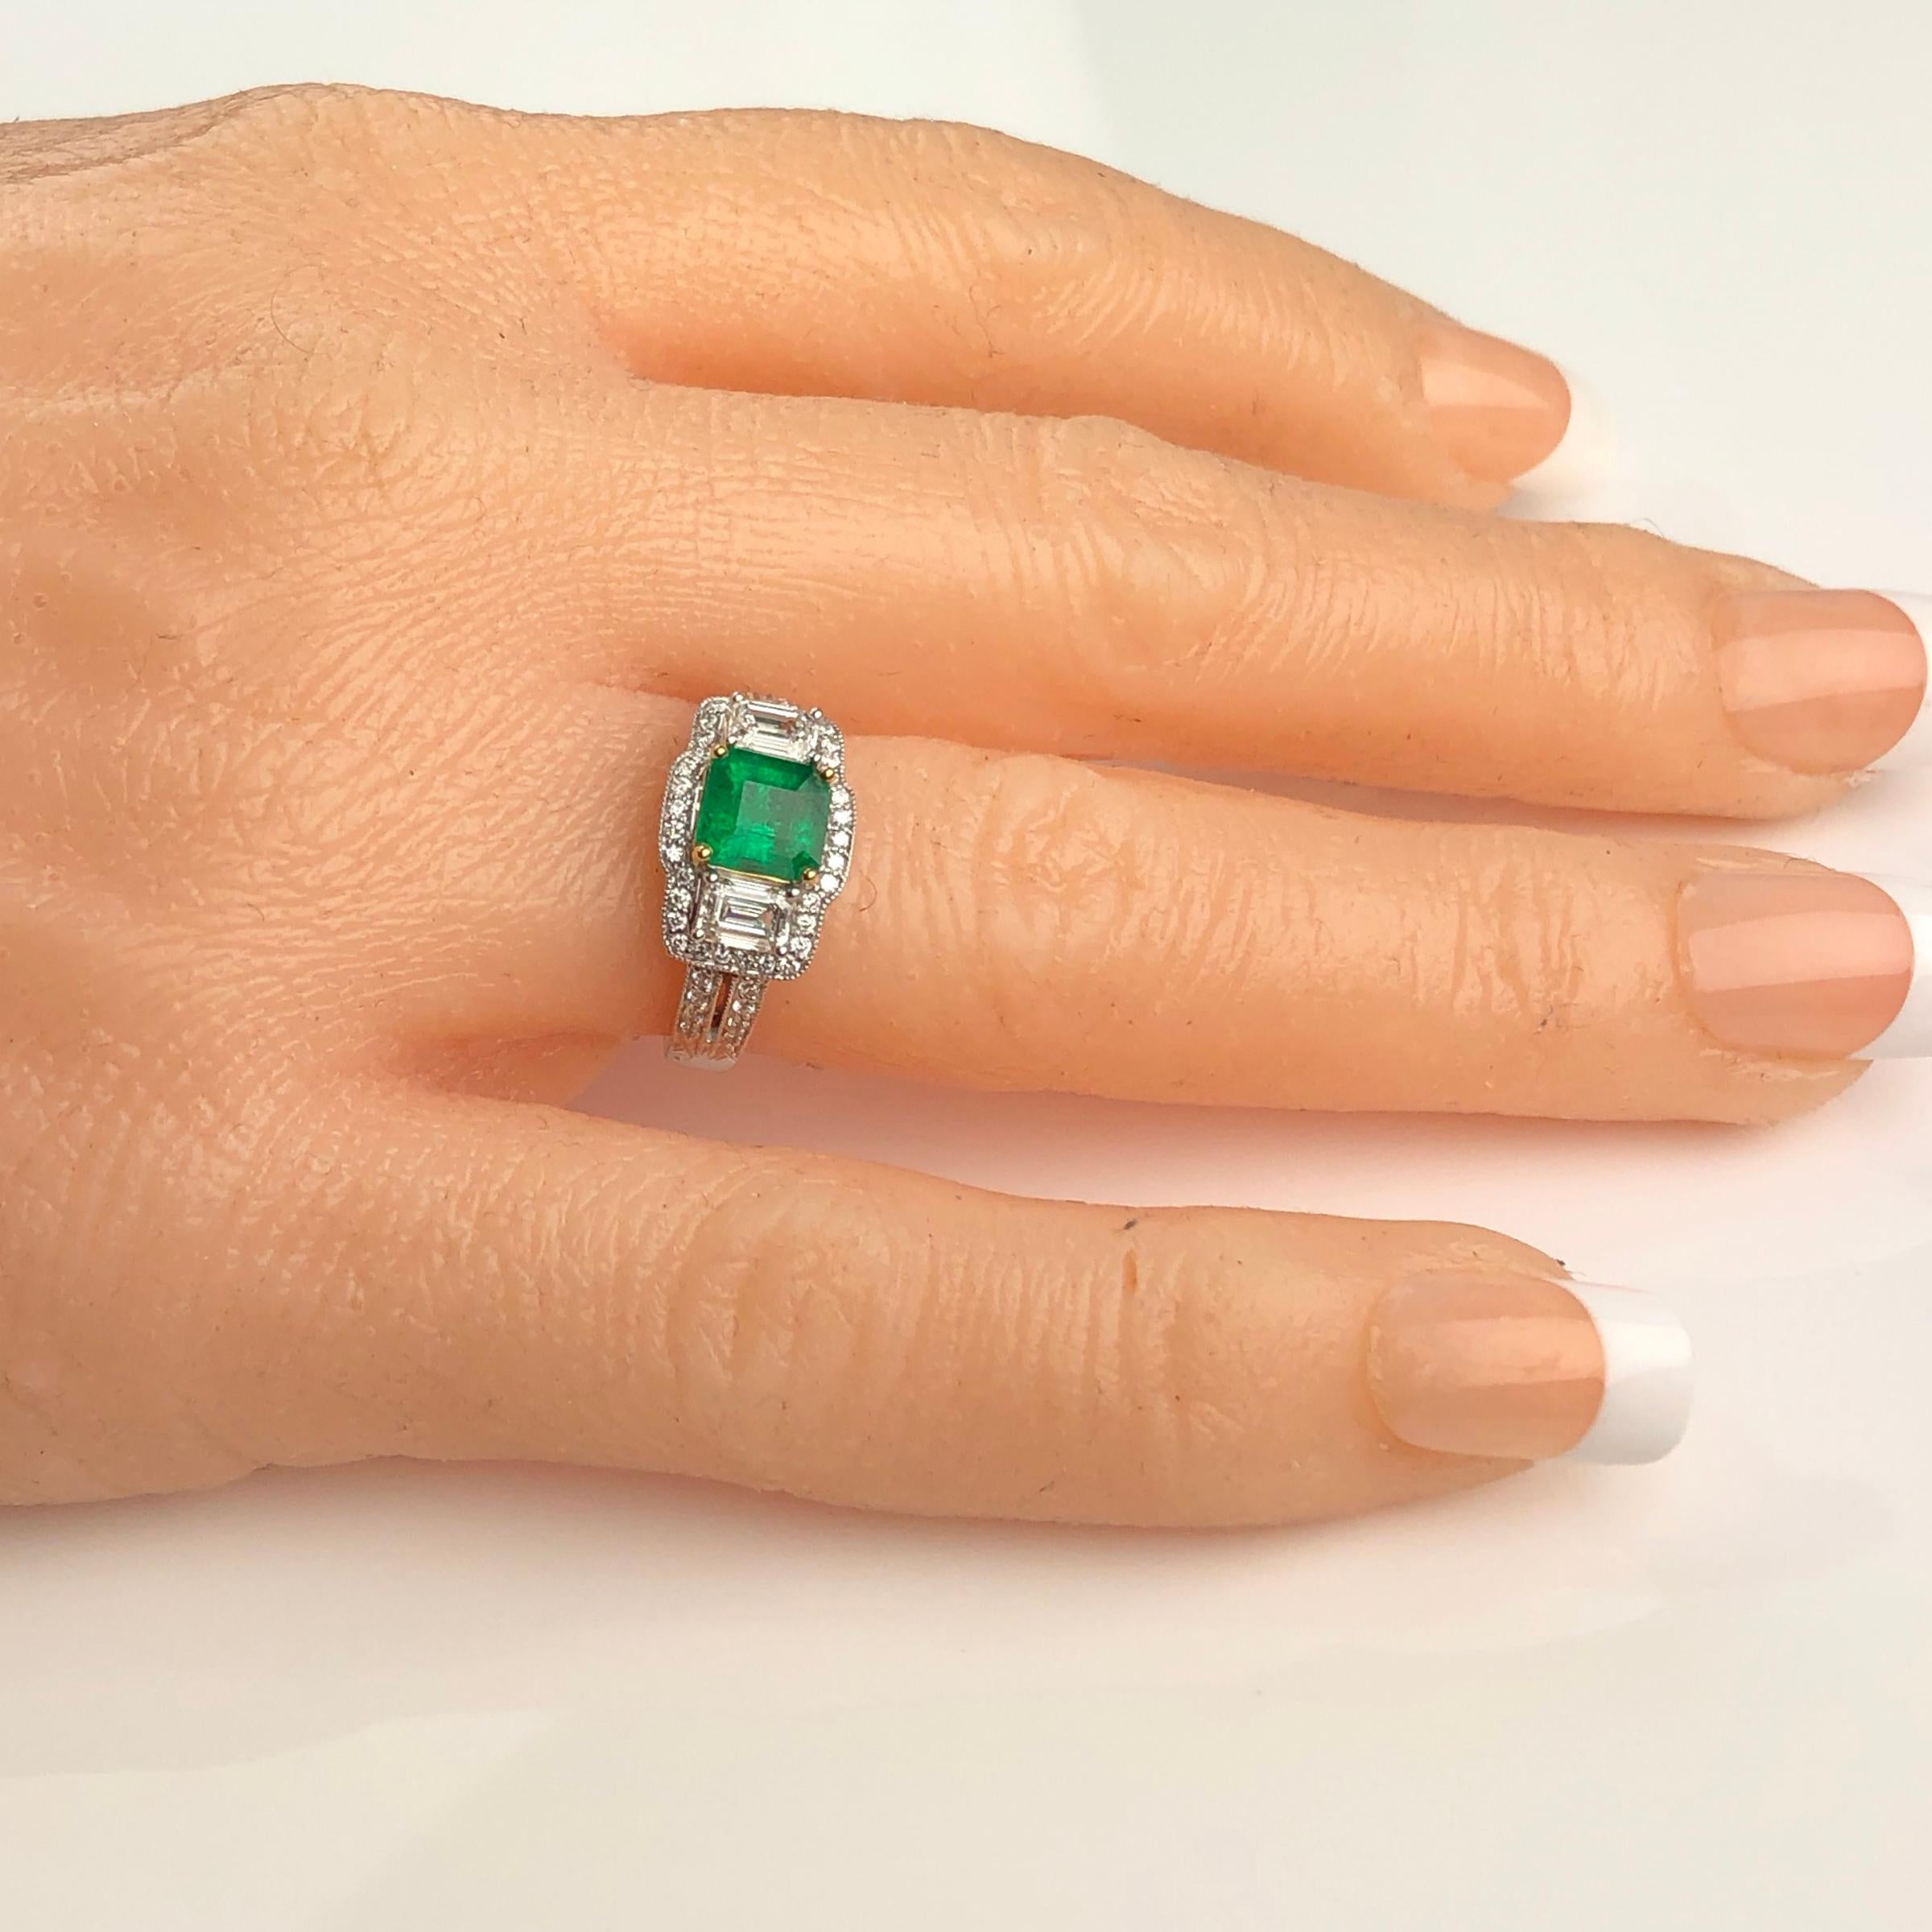 Women's 1.10 Carat Cushion Cut Emerald and 1.03 Carat Natural Diamond Ring in 18K ref942 For Sale